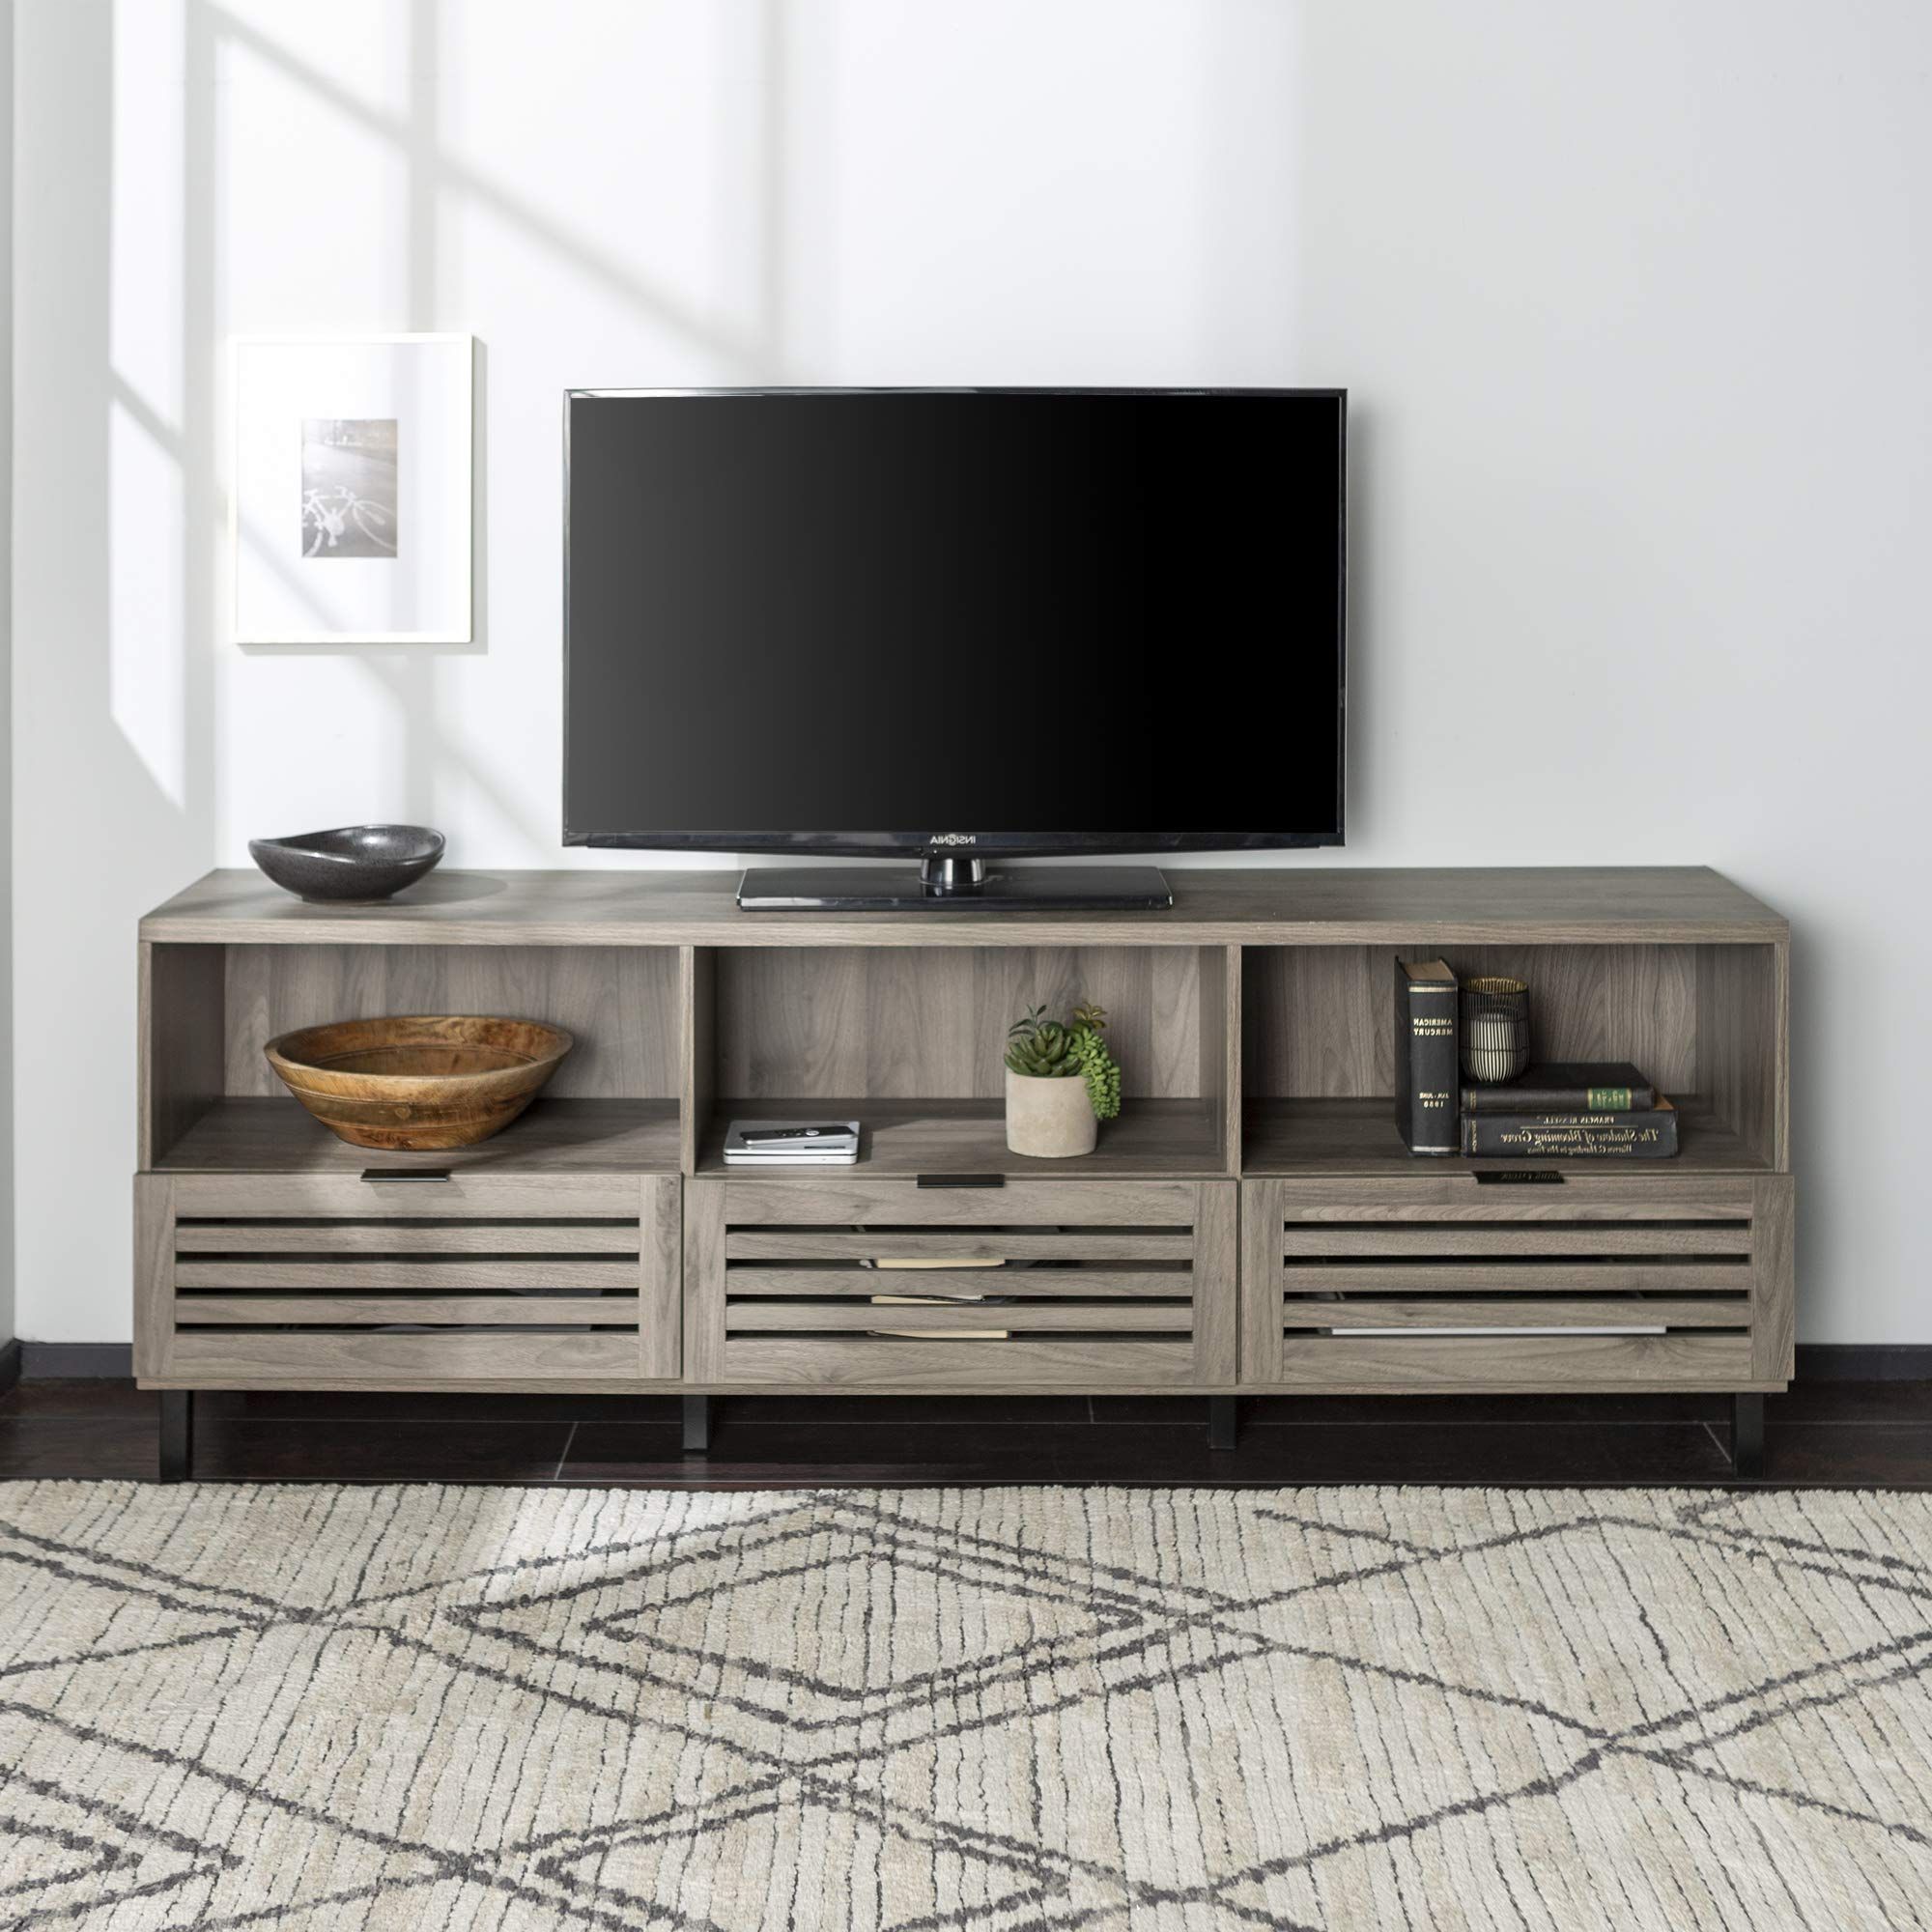 Well Known Amazon: Walker Edison Modern Slatted Wood Tv Stand For Tv's Up To 80"  Universal Tv Stand For Flat Screen Living Room Storage Cabinets And Shelves  Entertainment Center, 70 Inch, Slate Grey : In Slat Tv Stands (View 3 of 10)